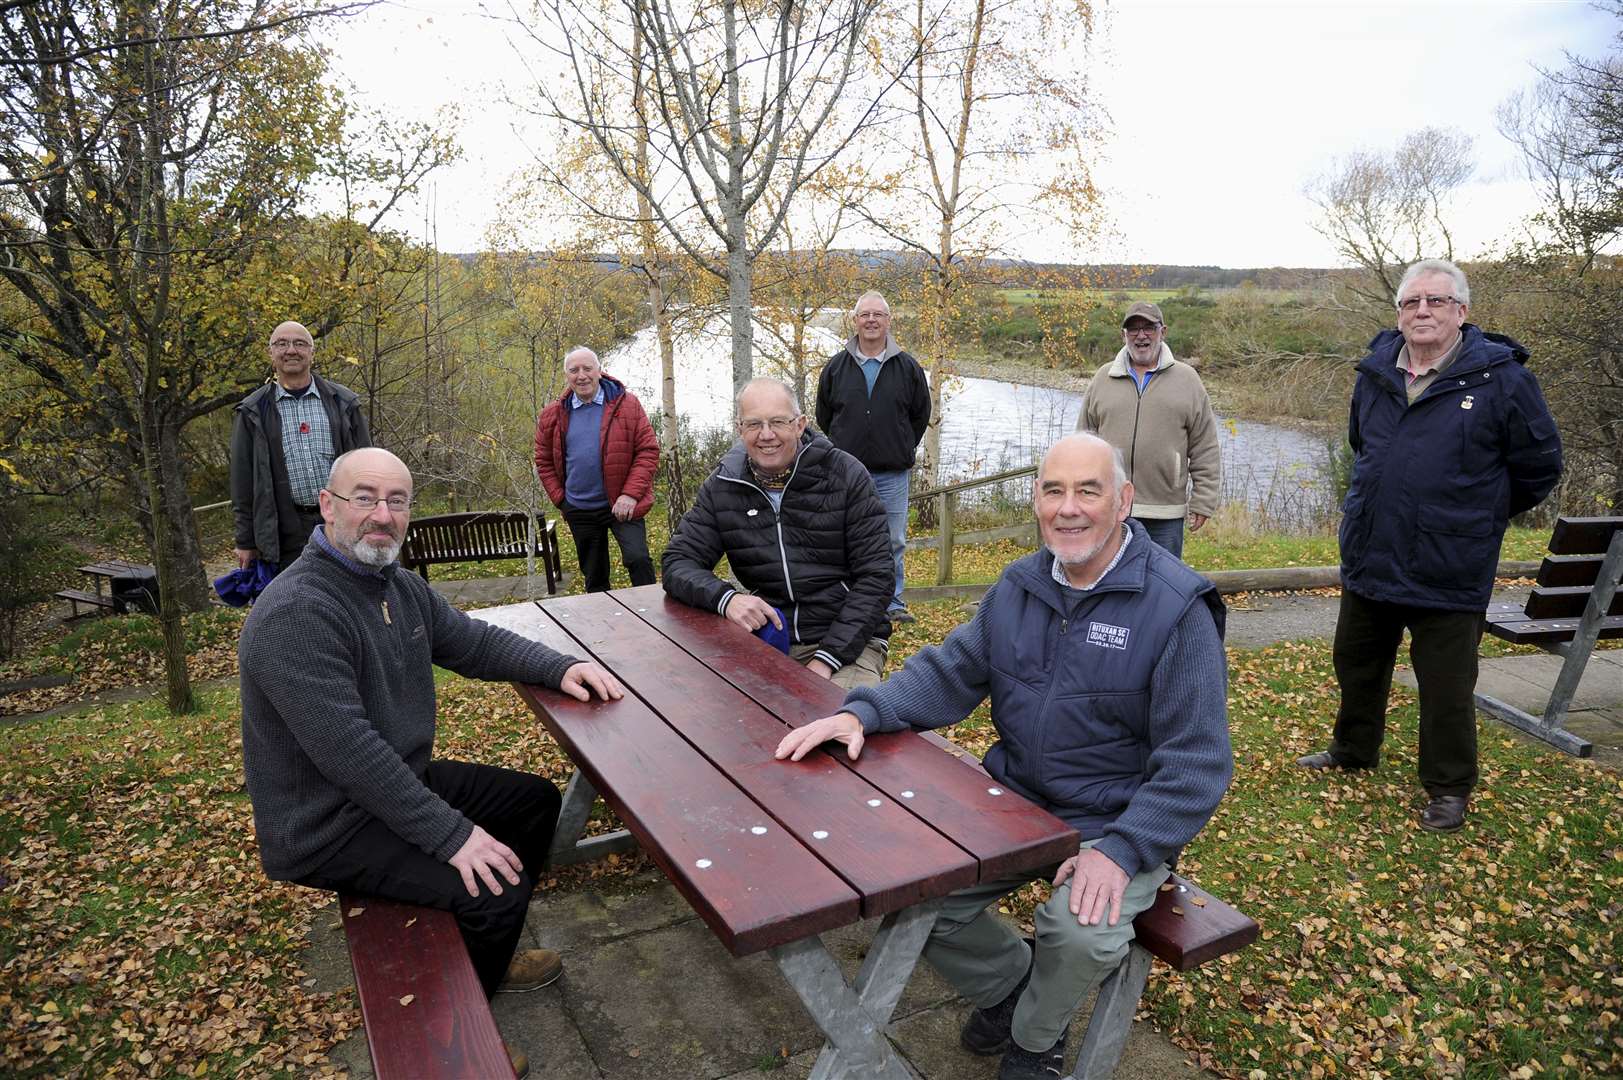 Fochabers Men's Shed group have renovated the picnic tables at the Fochaberian Memorial Gardens. Seated on the bench from left to right are Nick Chambers (Moray College), Mark Pilkington (Chairman of the Men's Shed Group) and George McIntyre (Baxtres trustee). Standing from left to tight at the back are John Howie, Dave Thow, Peter Milne, John Wright and Alex Hume. Picture: Eric Cormack